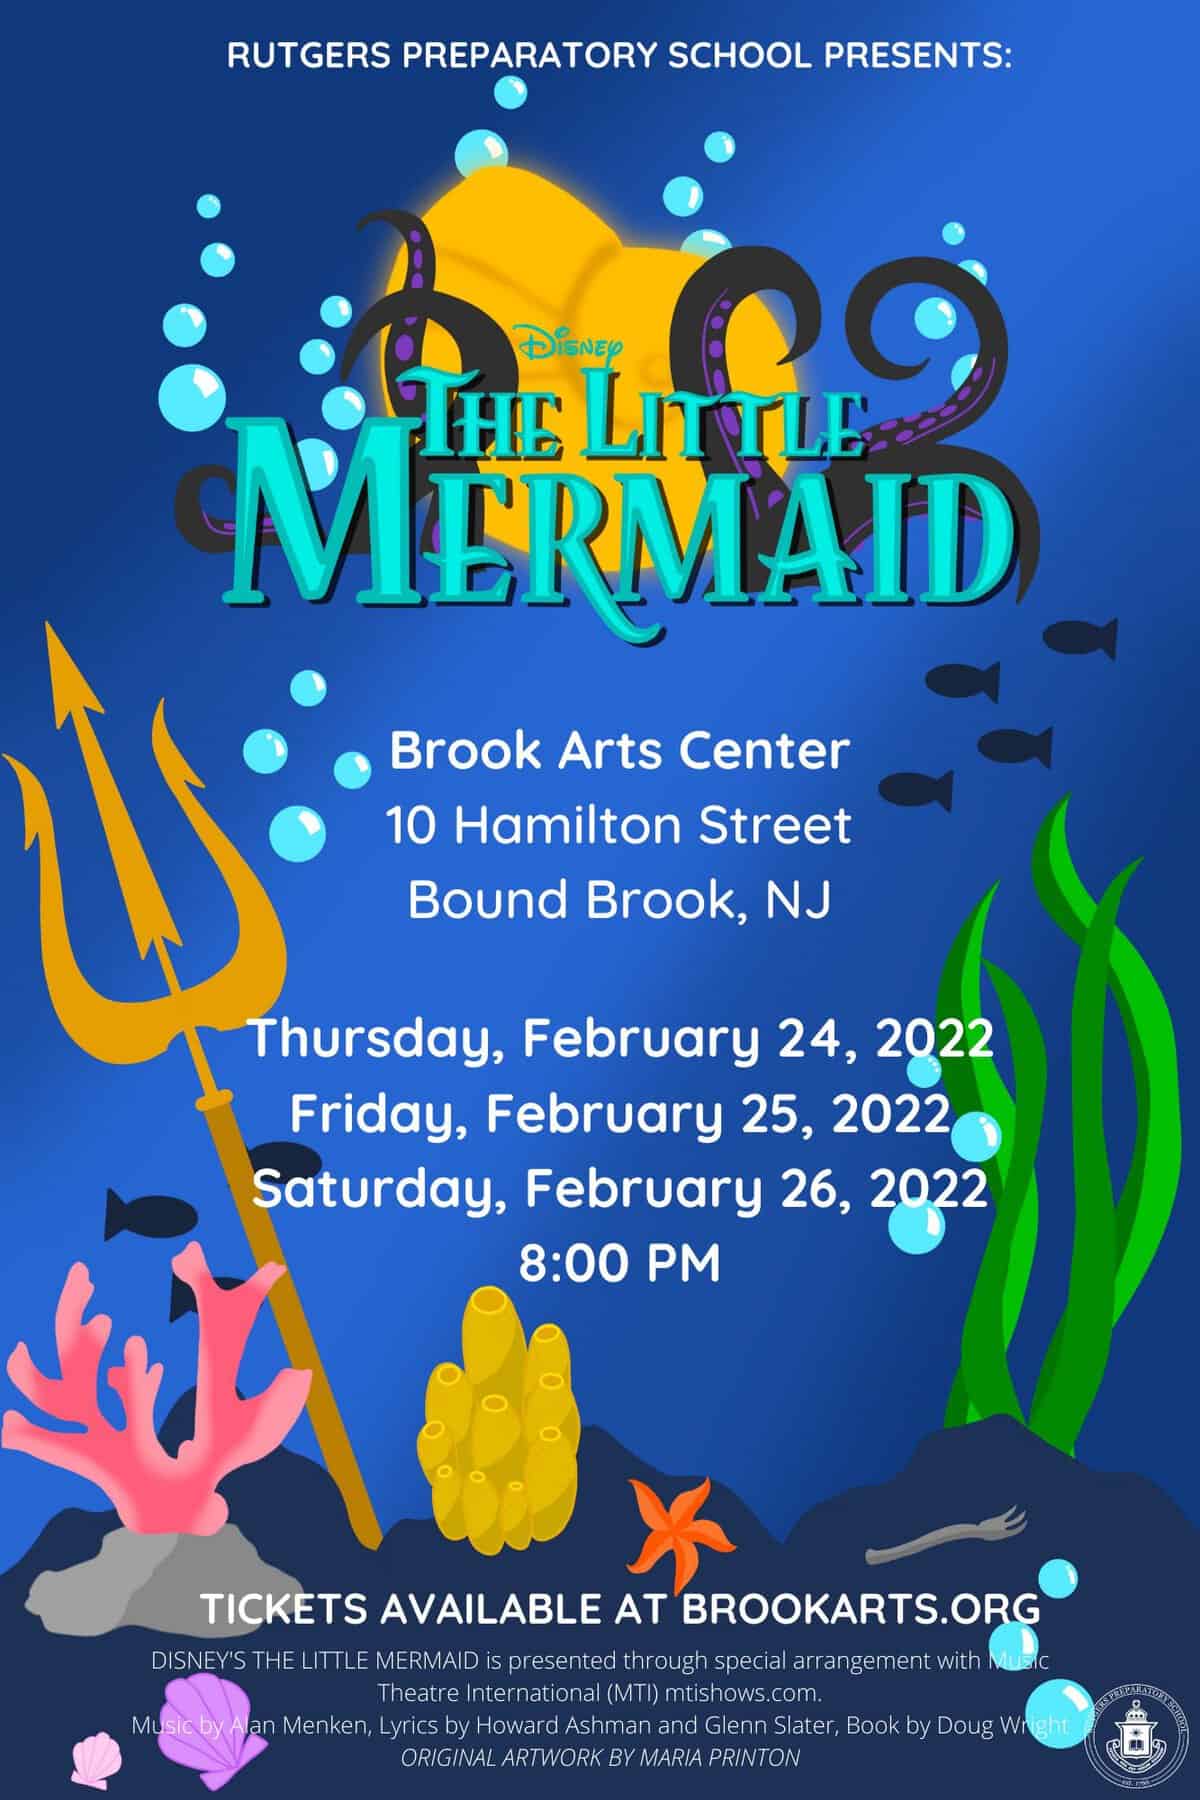 Rutgers Preparatory School to Present "The Little Mermaid" Musical February 24-26 at Brook Arts Center in Bound Brook